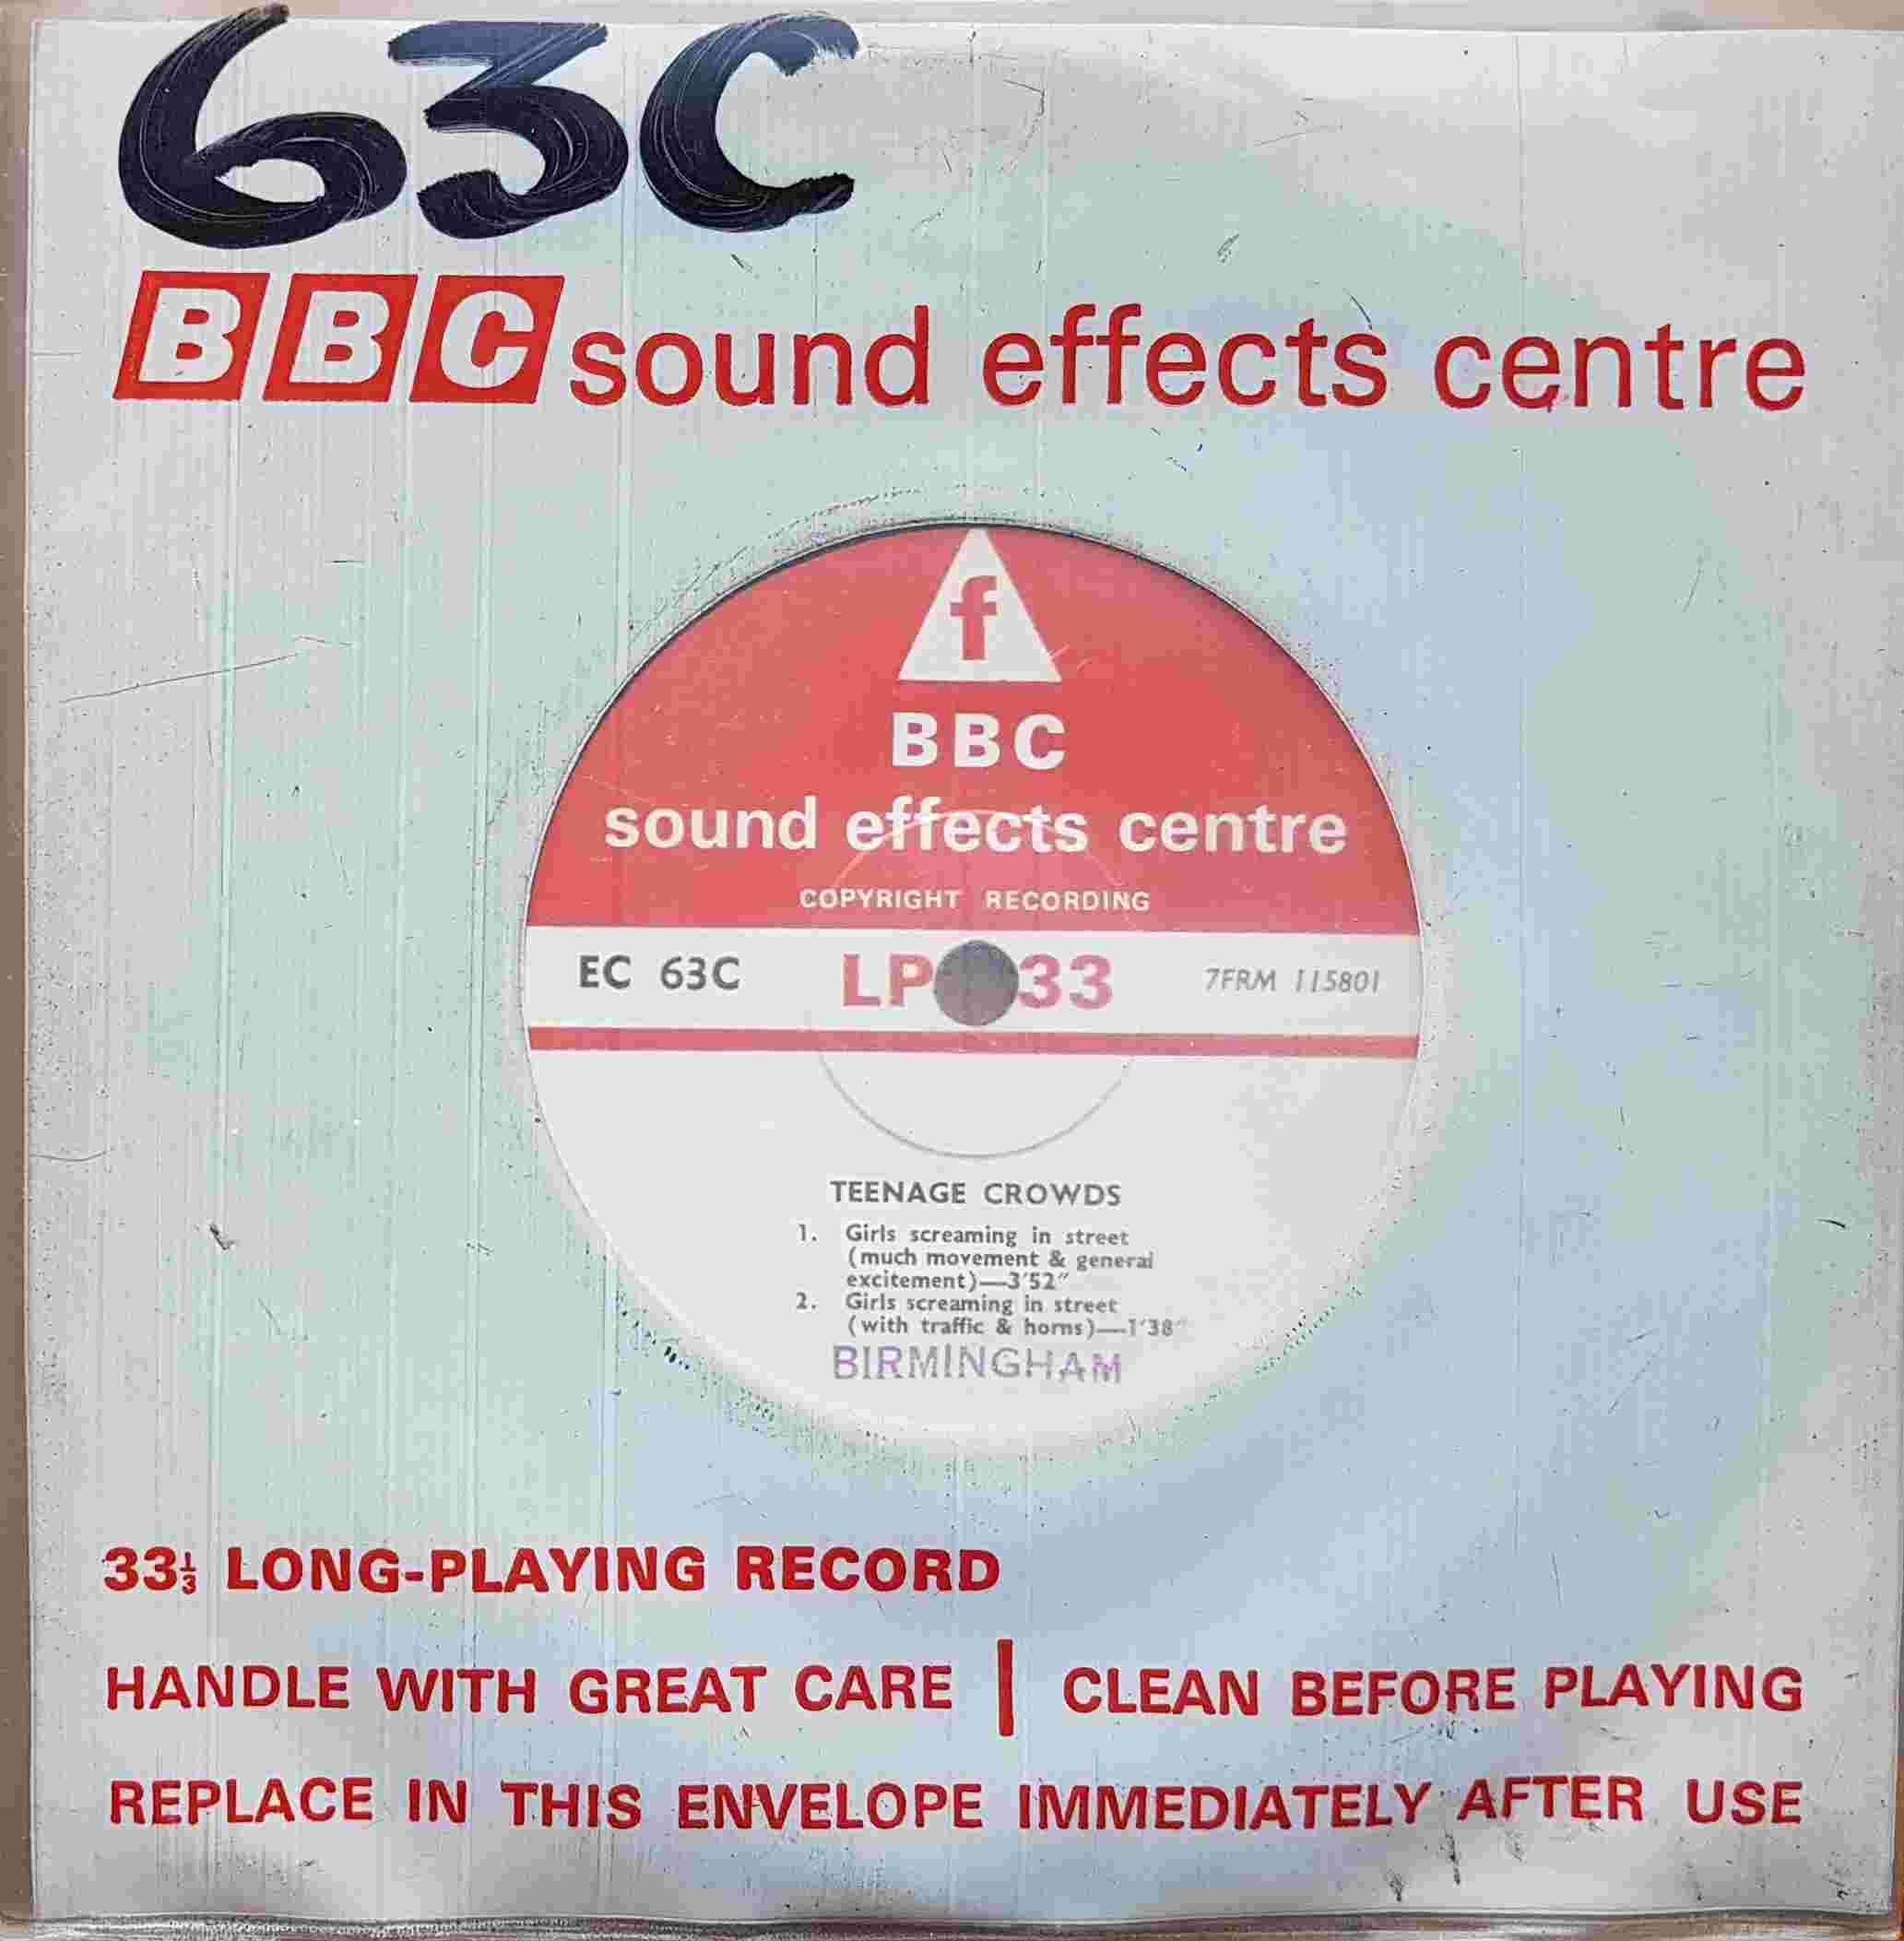 Picture of EC 63C Teenage crowds by artist Not registered from the BBC singles - Records and Tapes library